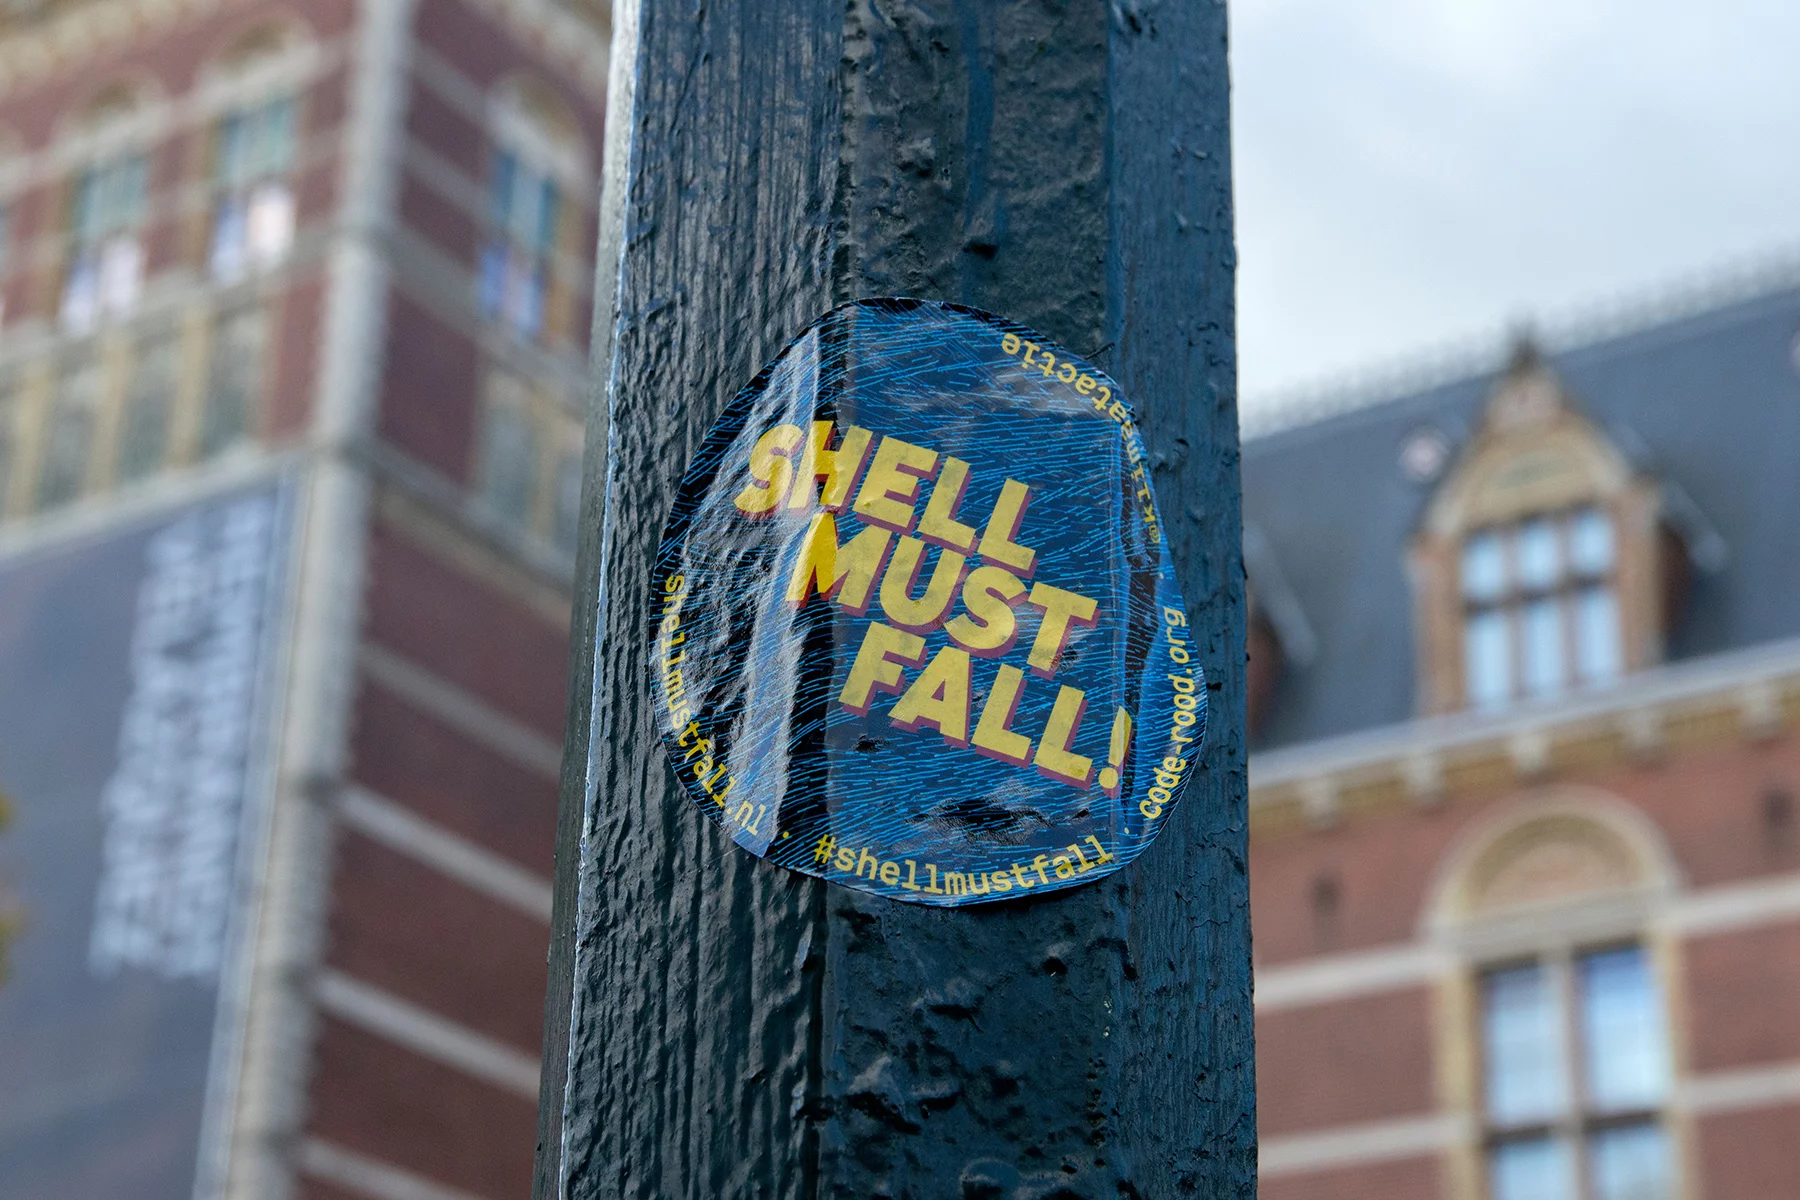 A Shell must fall sticker in Amsterdam